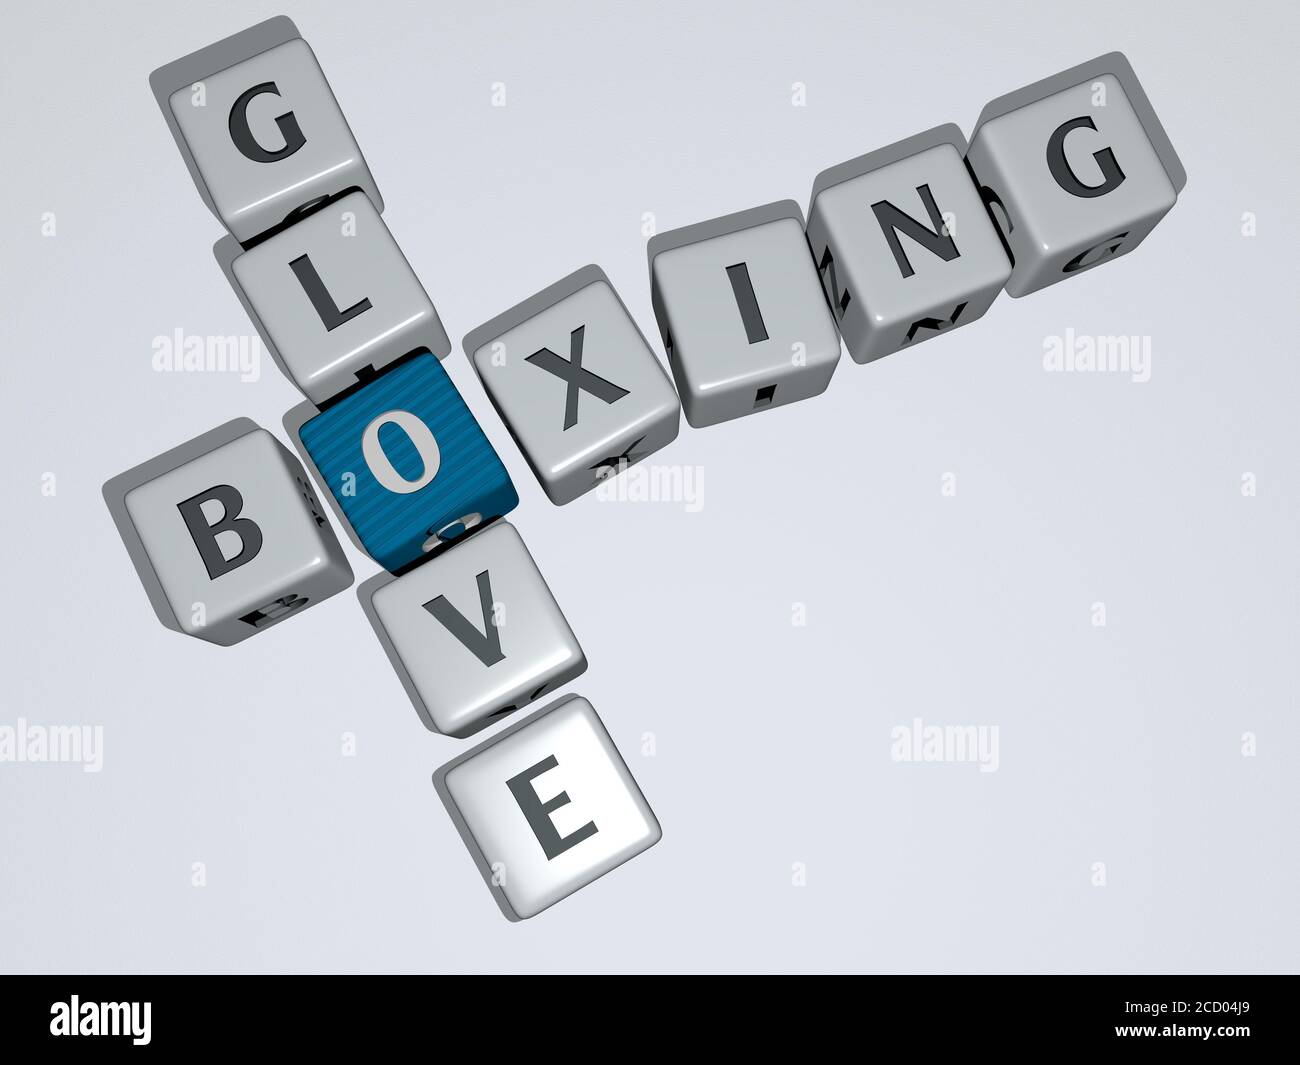 BOXING GLOVE crossword by cubic dice letters 3D illustration Stock